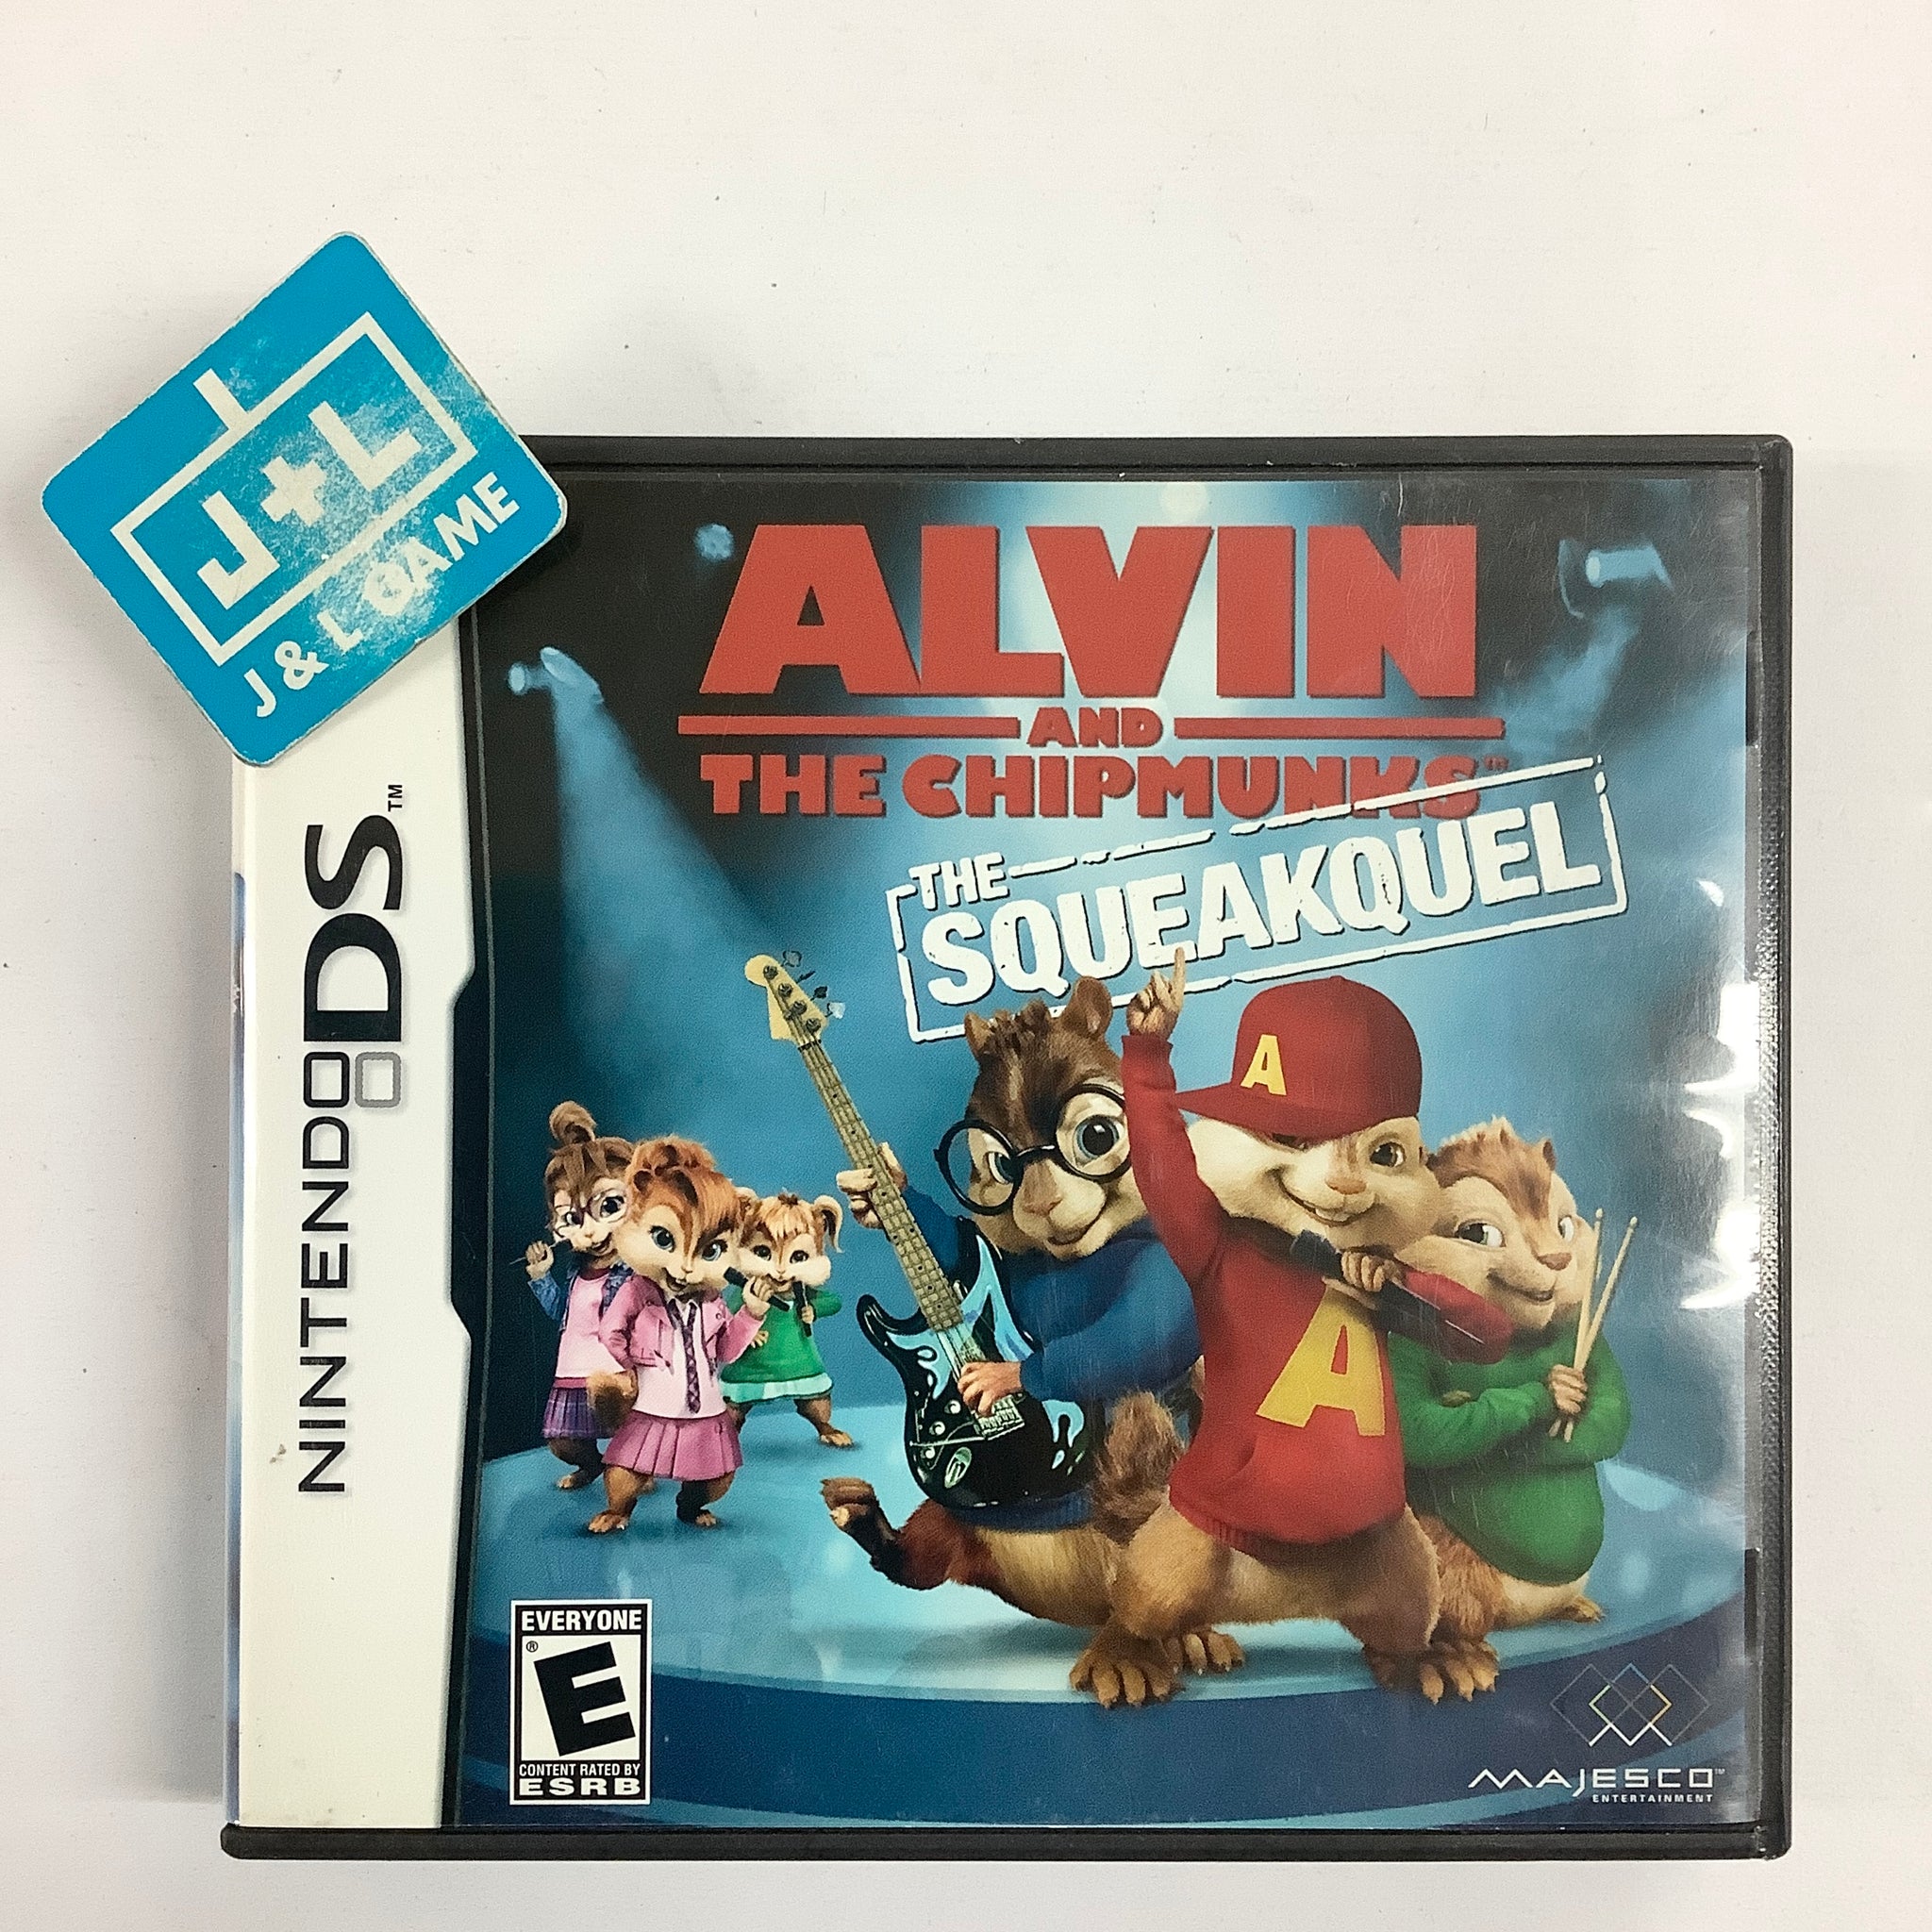 Alvin and the Chipmunks: The Squeakquel - Plugged In